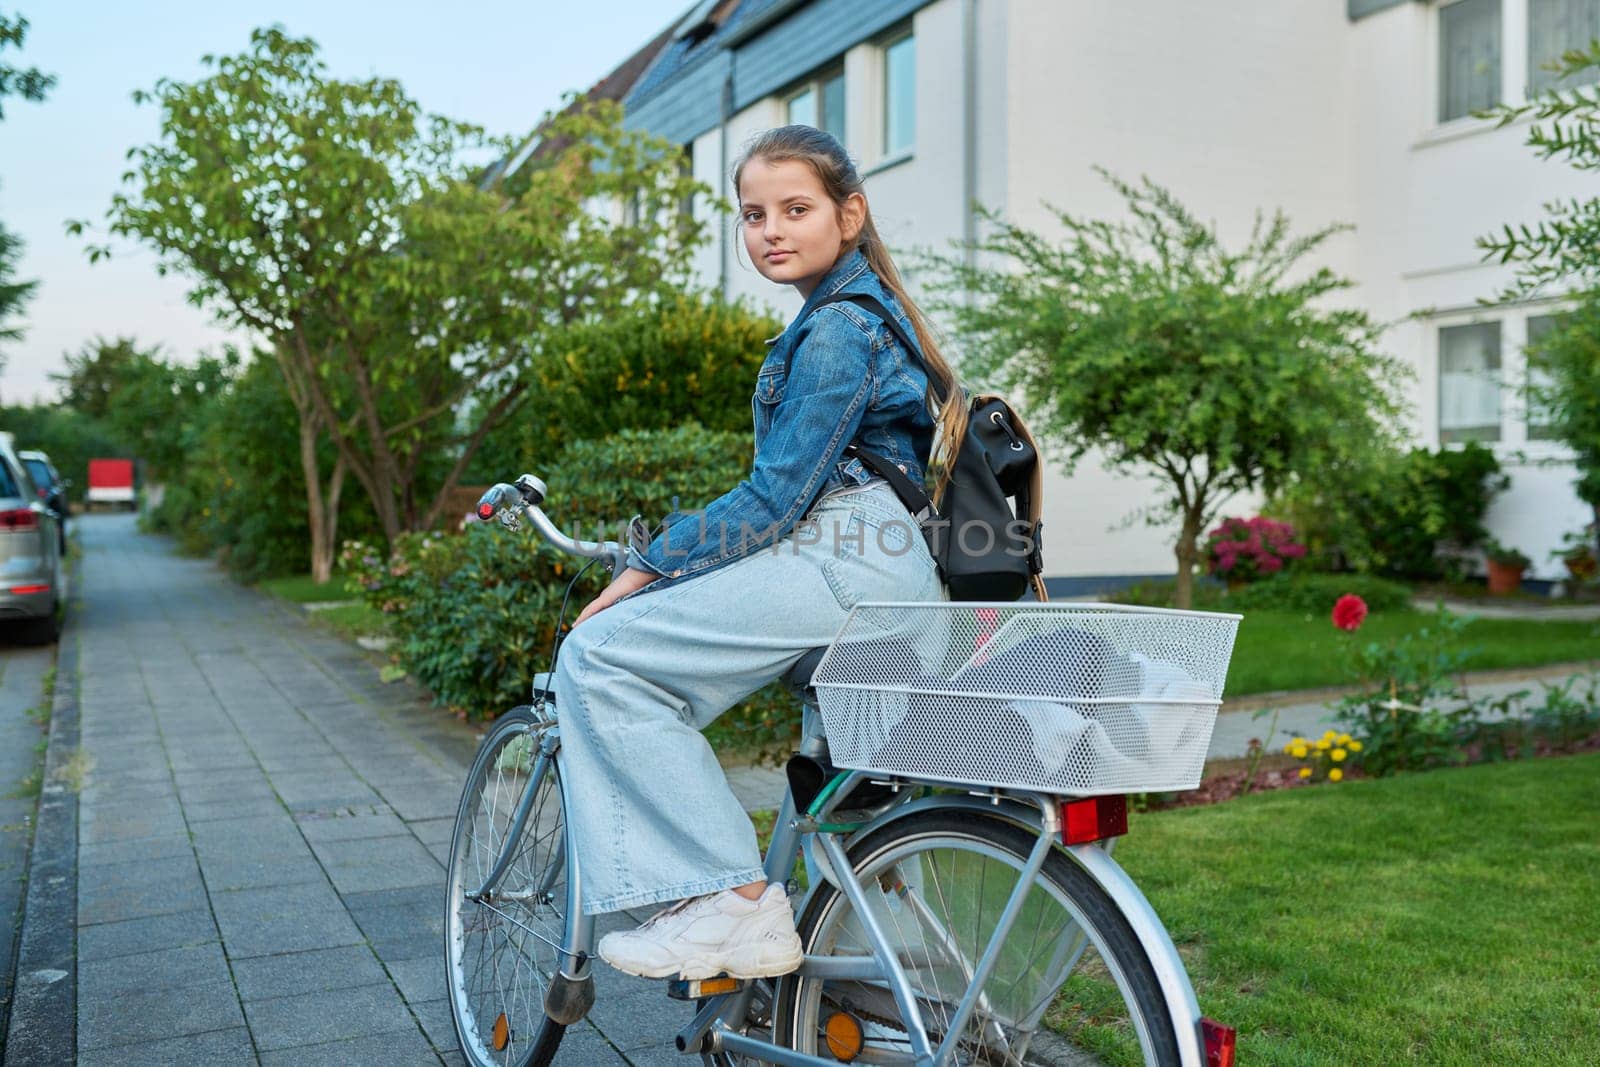 Back to school. Girl child 10, 11 years old with backpack on bicycle on street near house, posing looking at camera. Schoolgirl cycling to school, lifestyle, childhood concept